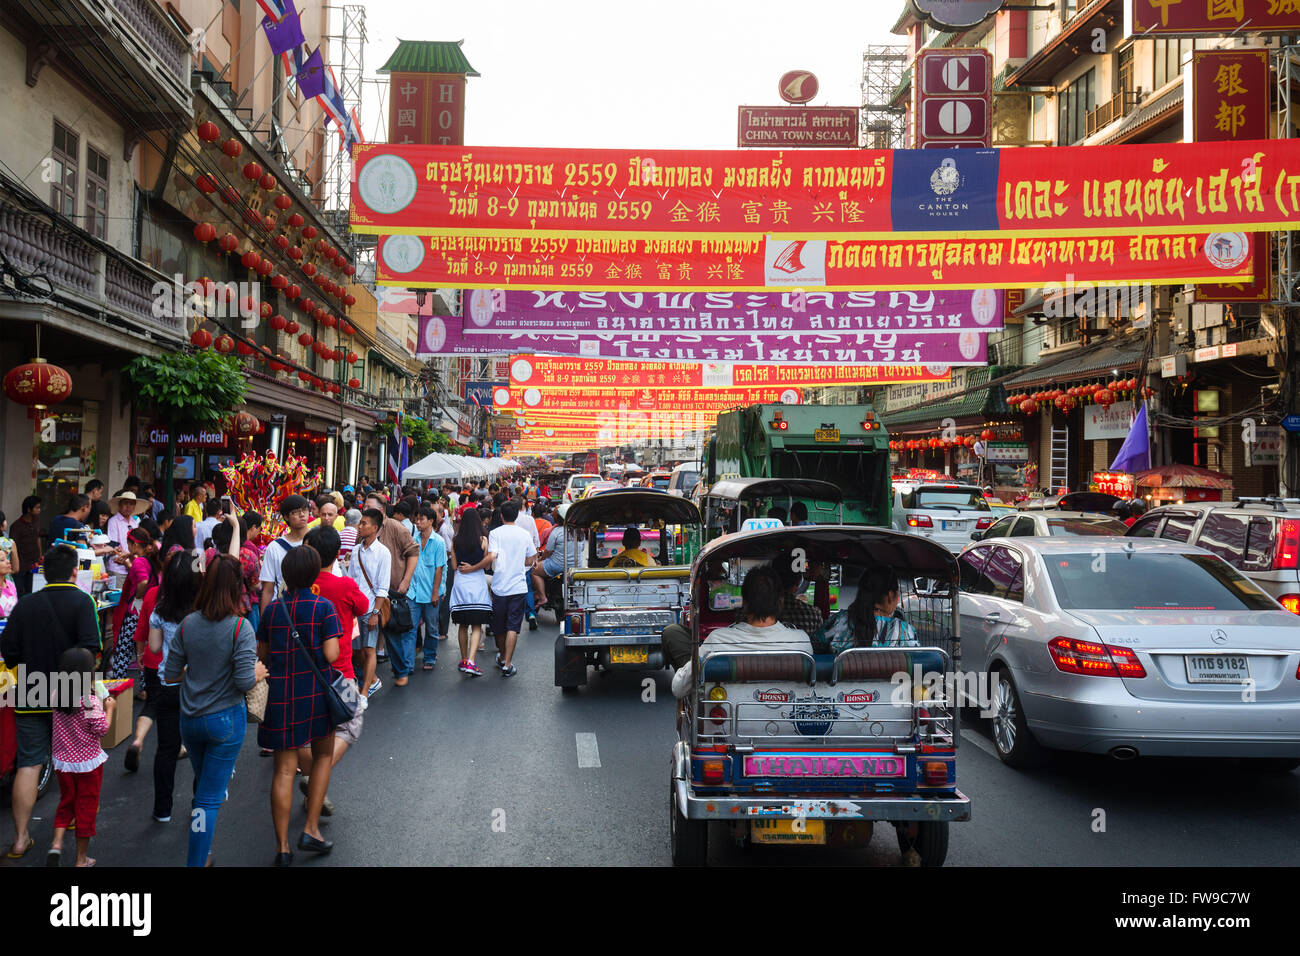 Heavy traffic in Yaowaraj road, tuk tuks and banners announcing the Chinese New Year festival, Chinatown Stock Photo